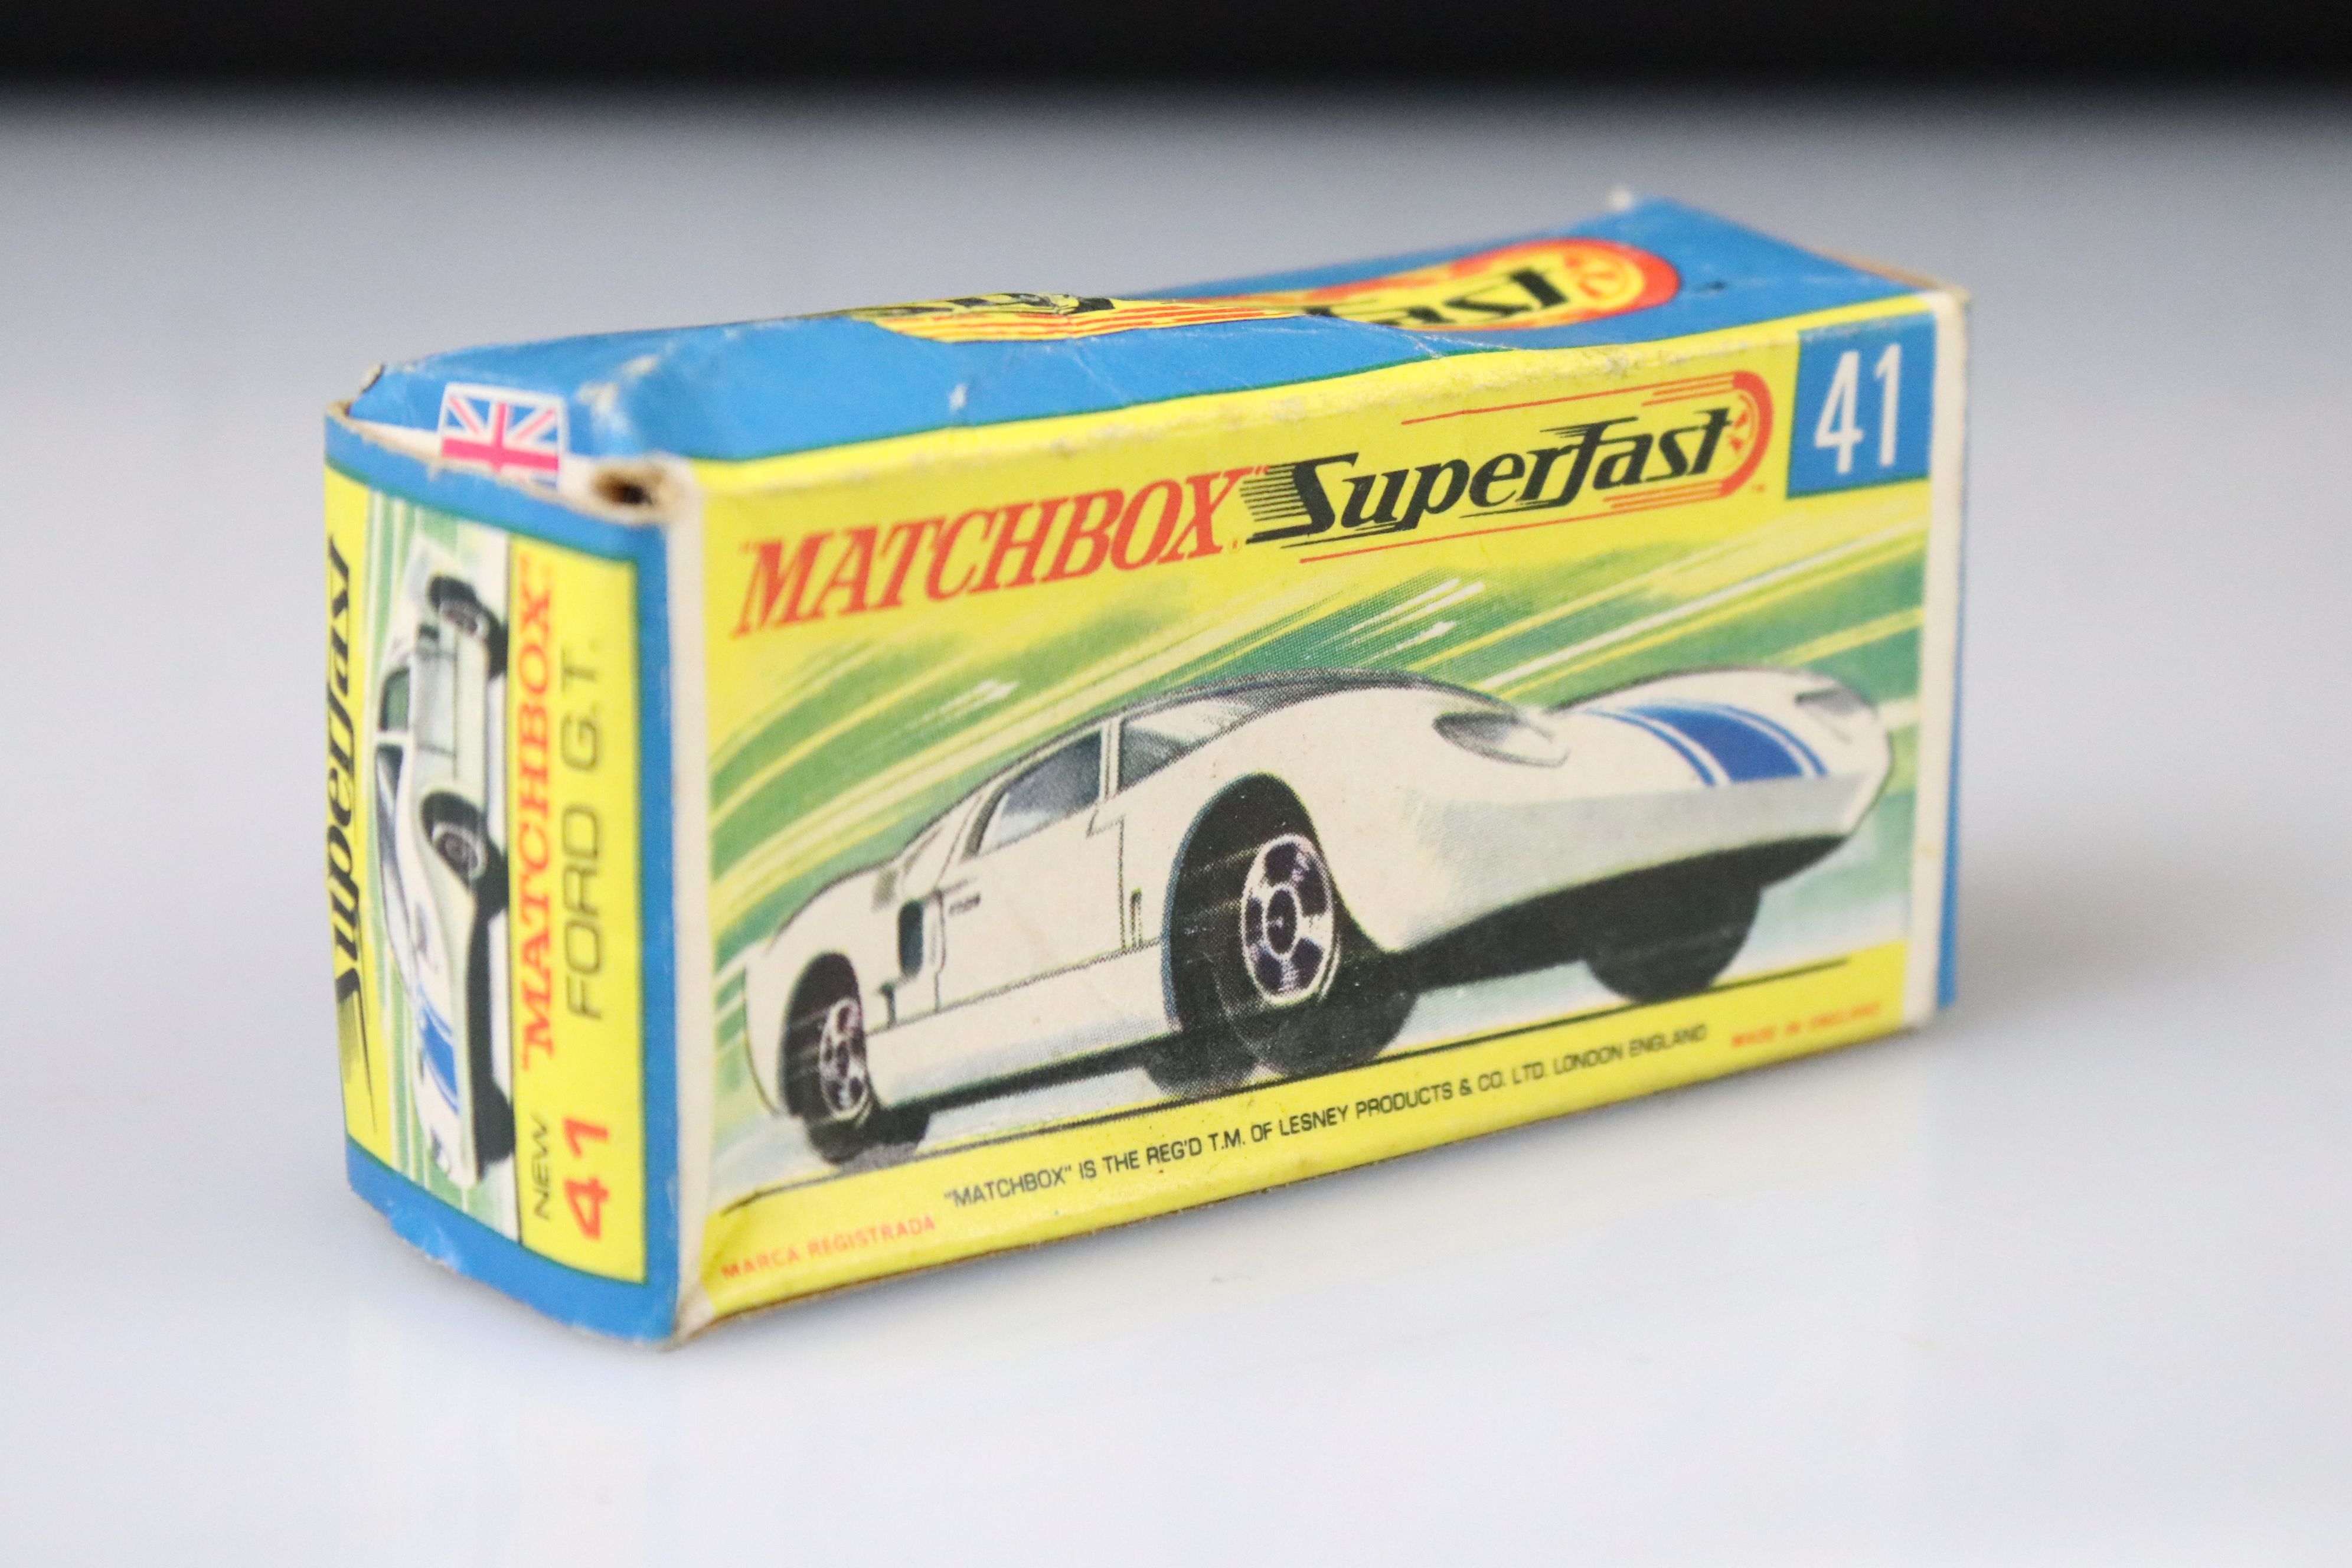 17 Boxed Matchbox Superfast diecast models to include 41 Ford GT, 29 Racing Mini, 57 Landrover - Image 50 of 53